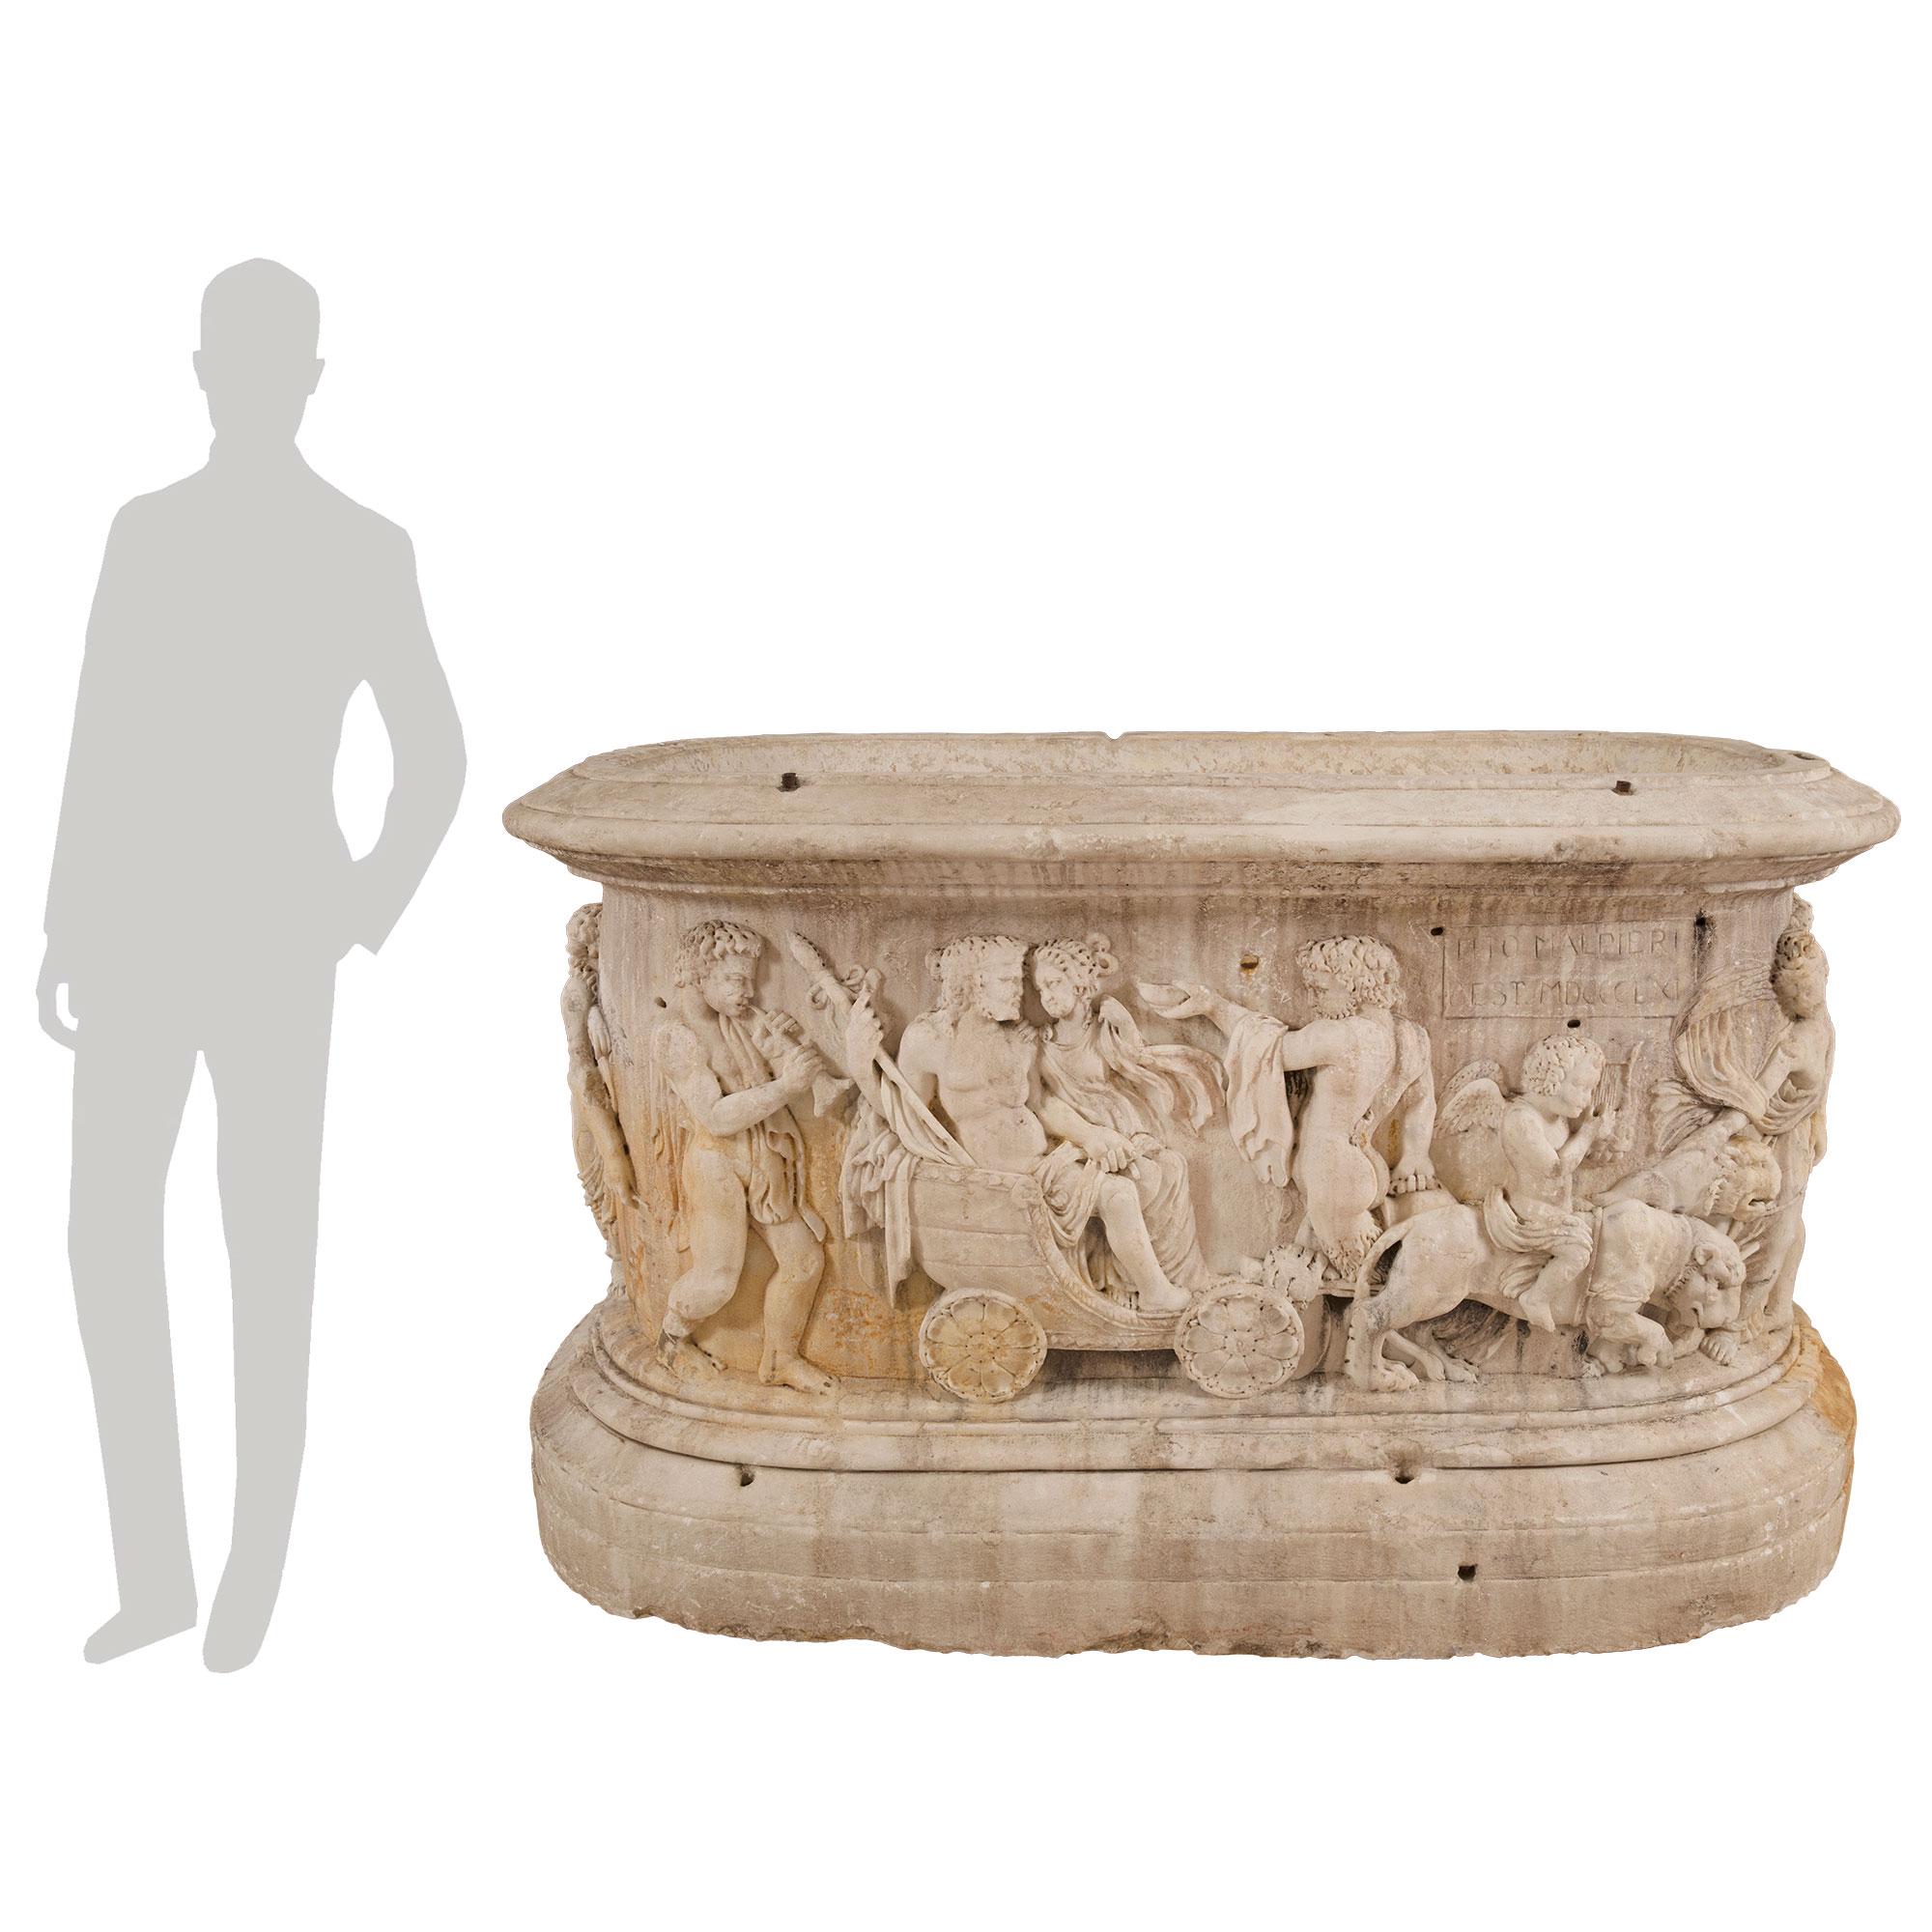 A truly spectacular and monumentally scaled Italian 19th century Neo-Classical st. white Carrara marble planter of the Marriage of Bacchus and Ariadne. The statement making planter is raised by a striking thick mottled base with a fine wrap around